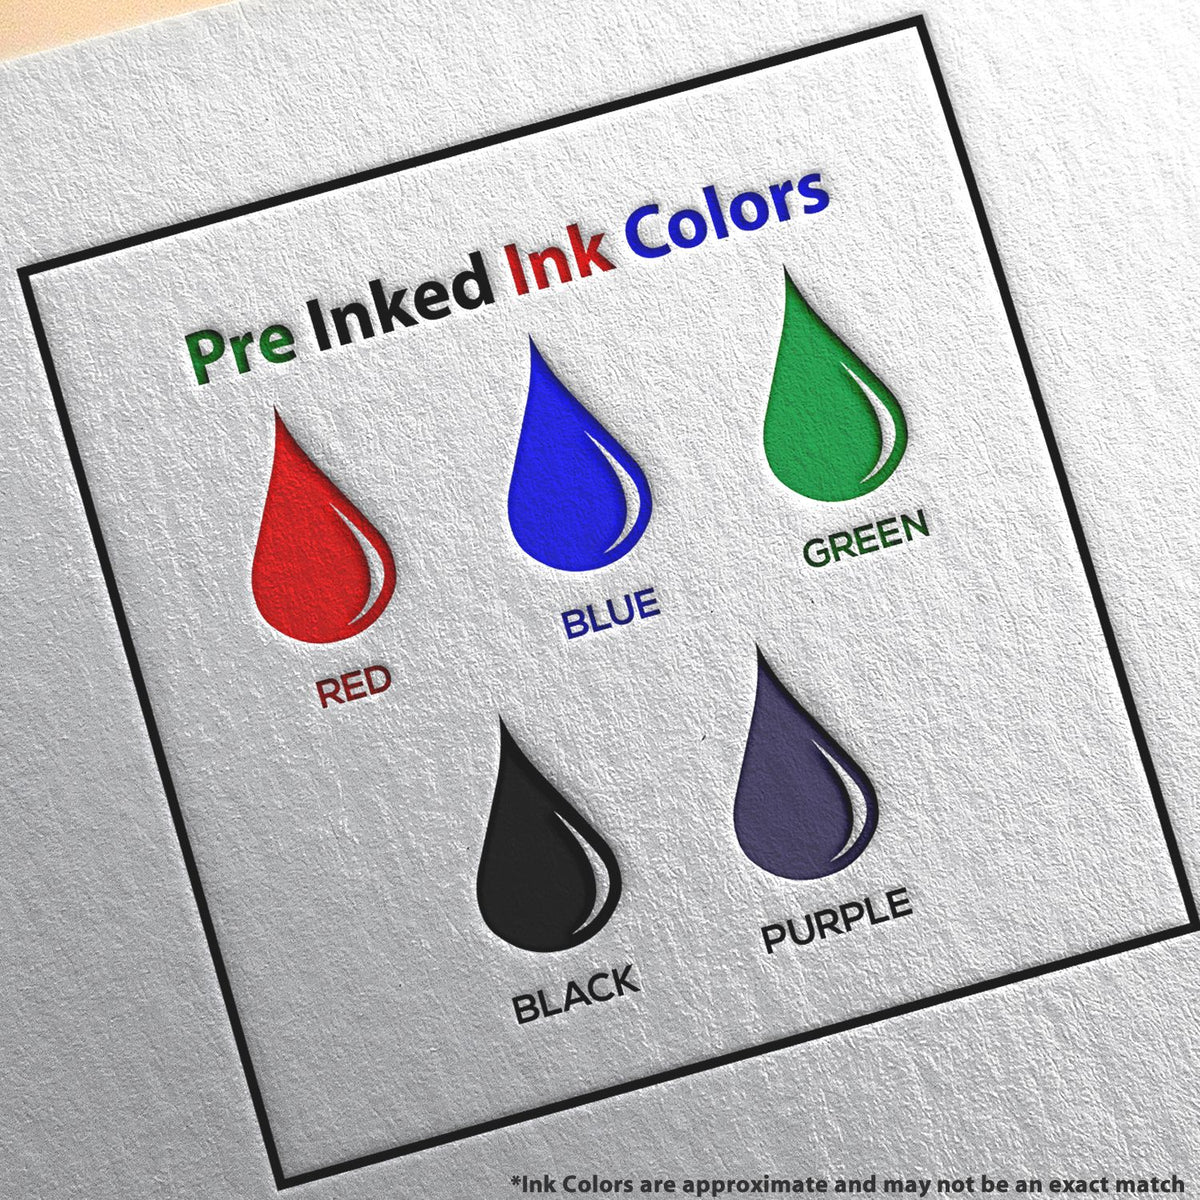 A picture showing the different ink colors or hues available for the PSI Rhode Island Notary Stamp product.